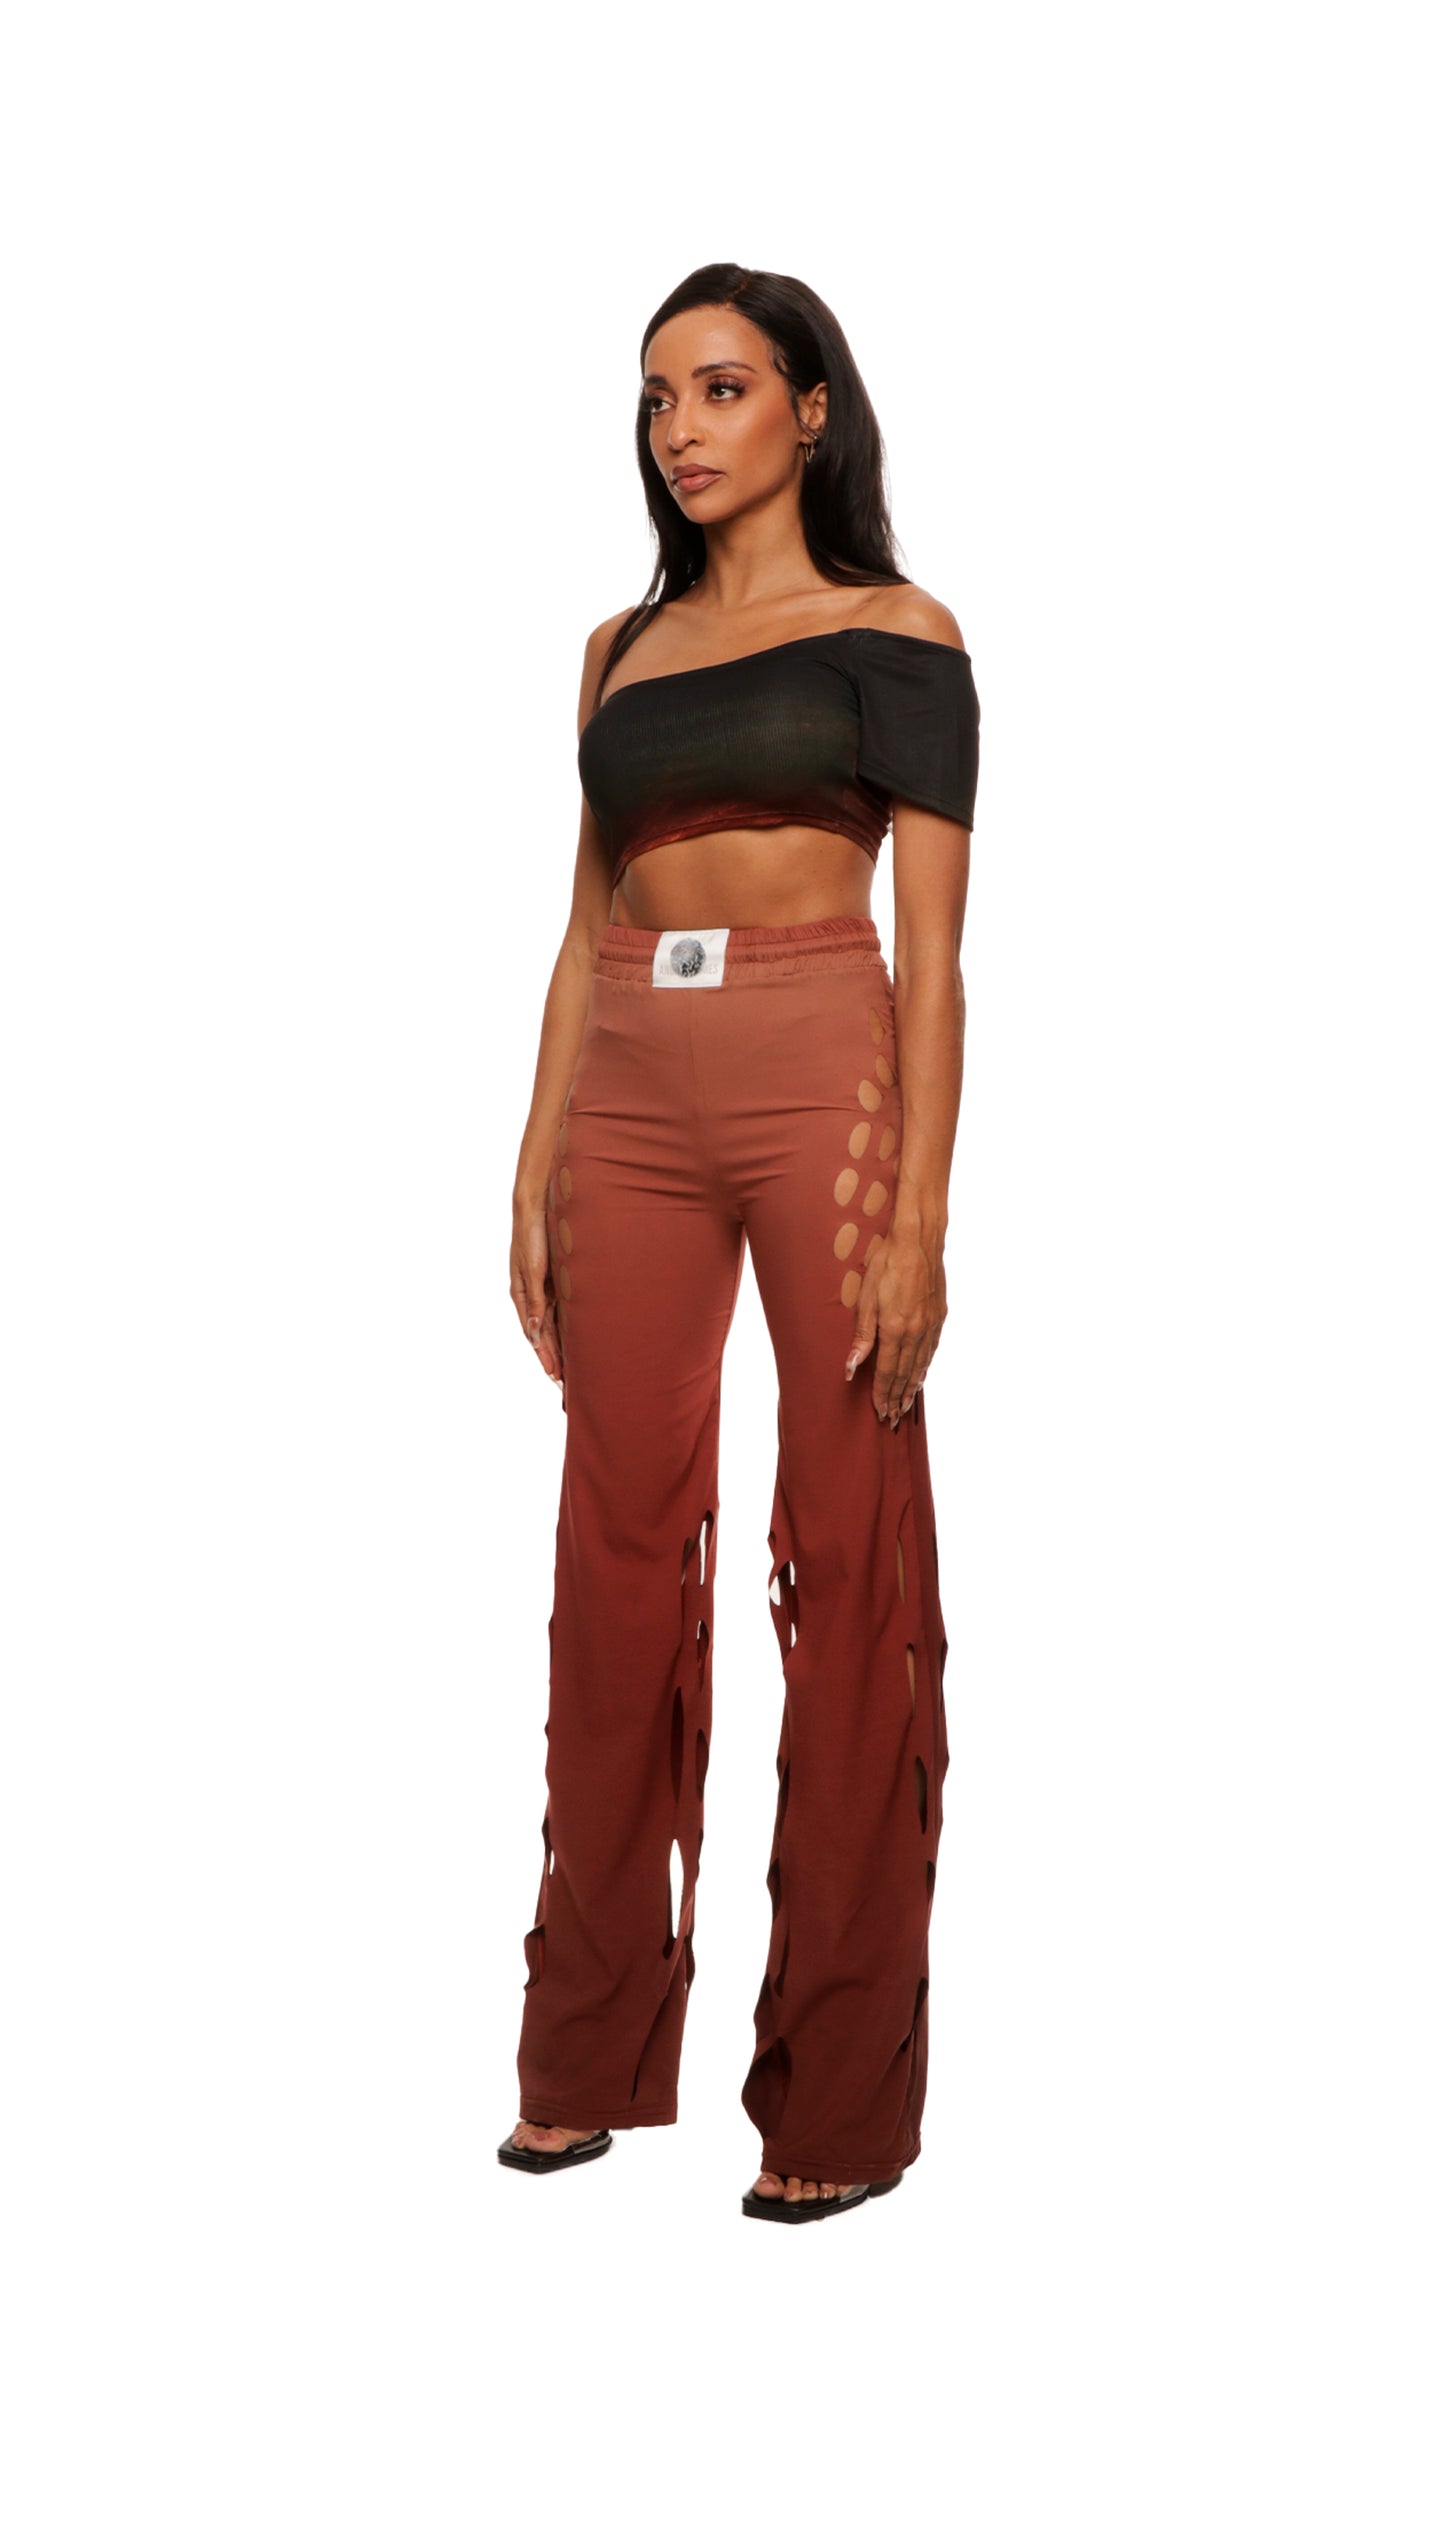 Woman who looks like Beyoncé or Aaliyah wears gradient brown toned bottoms or pants with cutout details on the sides, side view